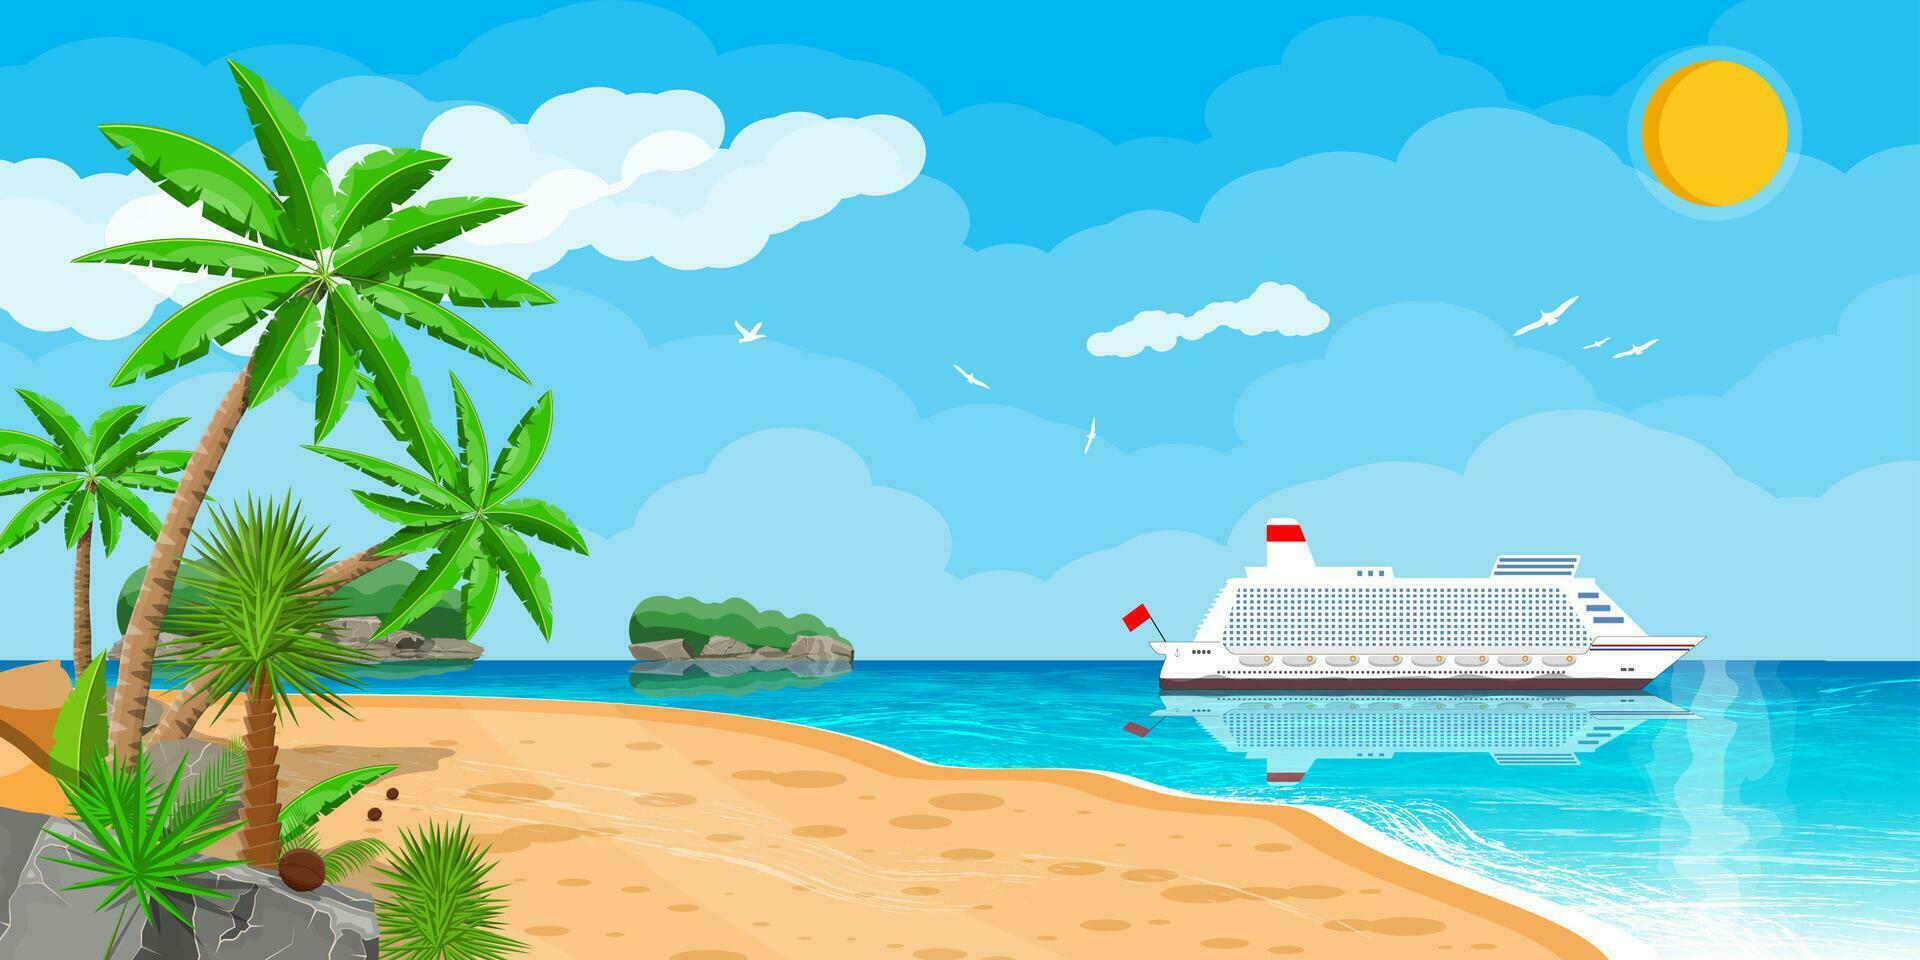 Landscape of islands and beach. Cruise liner ship. Sun with reflection in water and clouds. Day in tropical place. Vector illustration in flat style